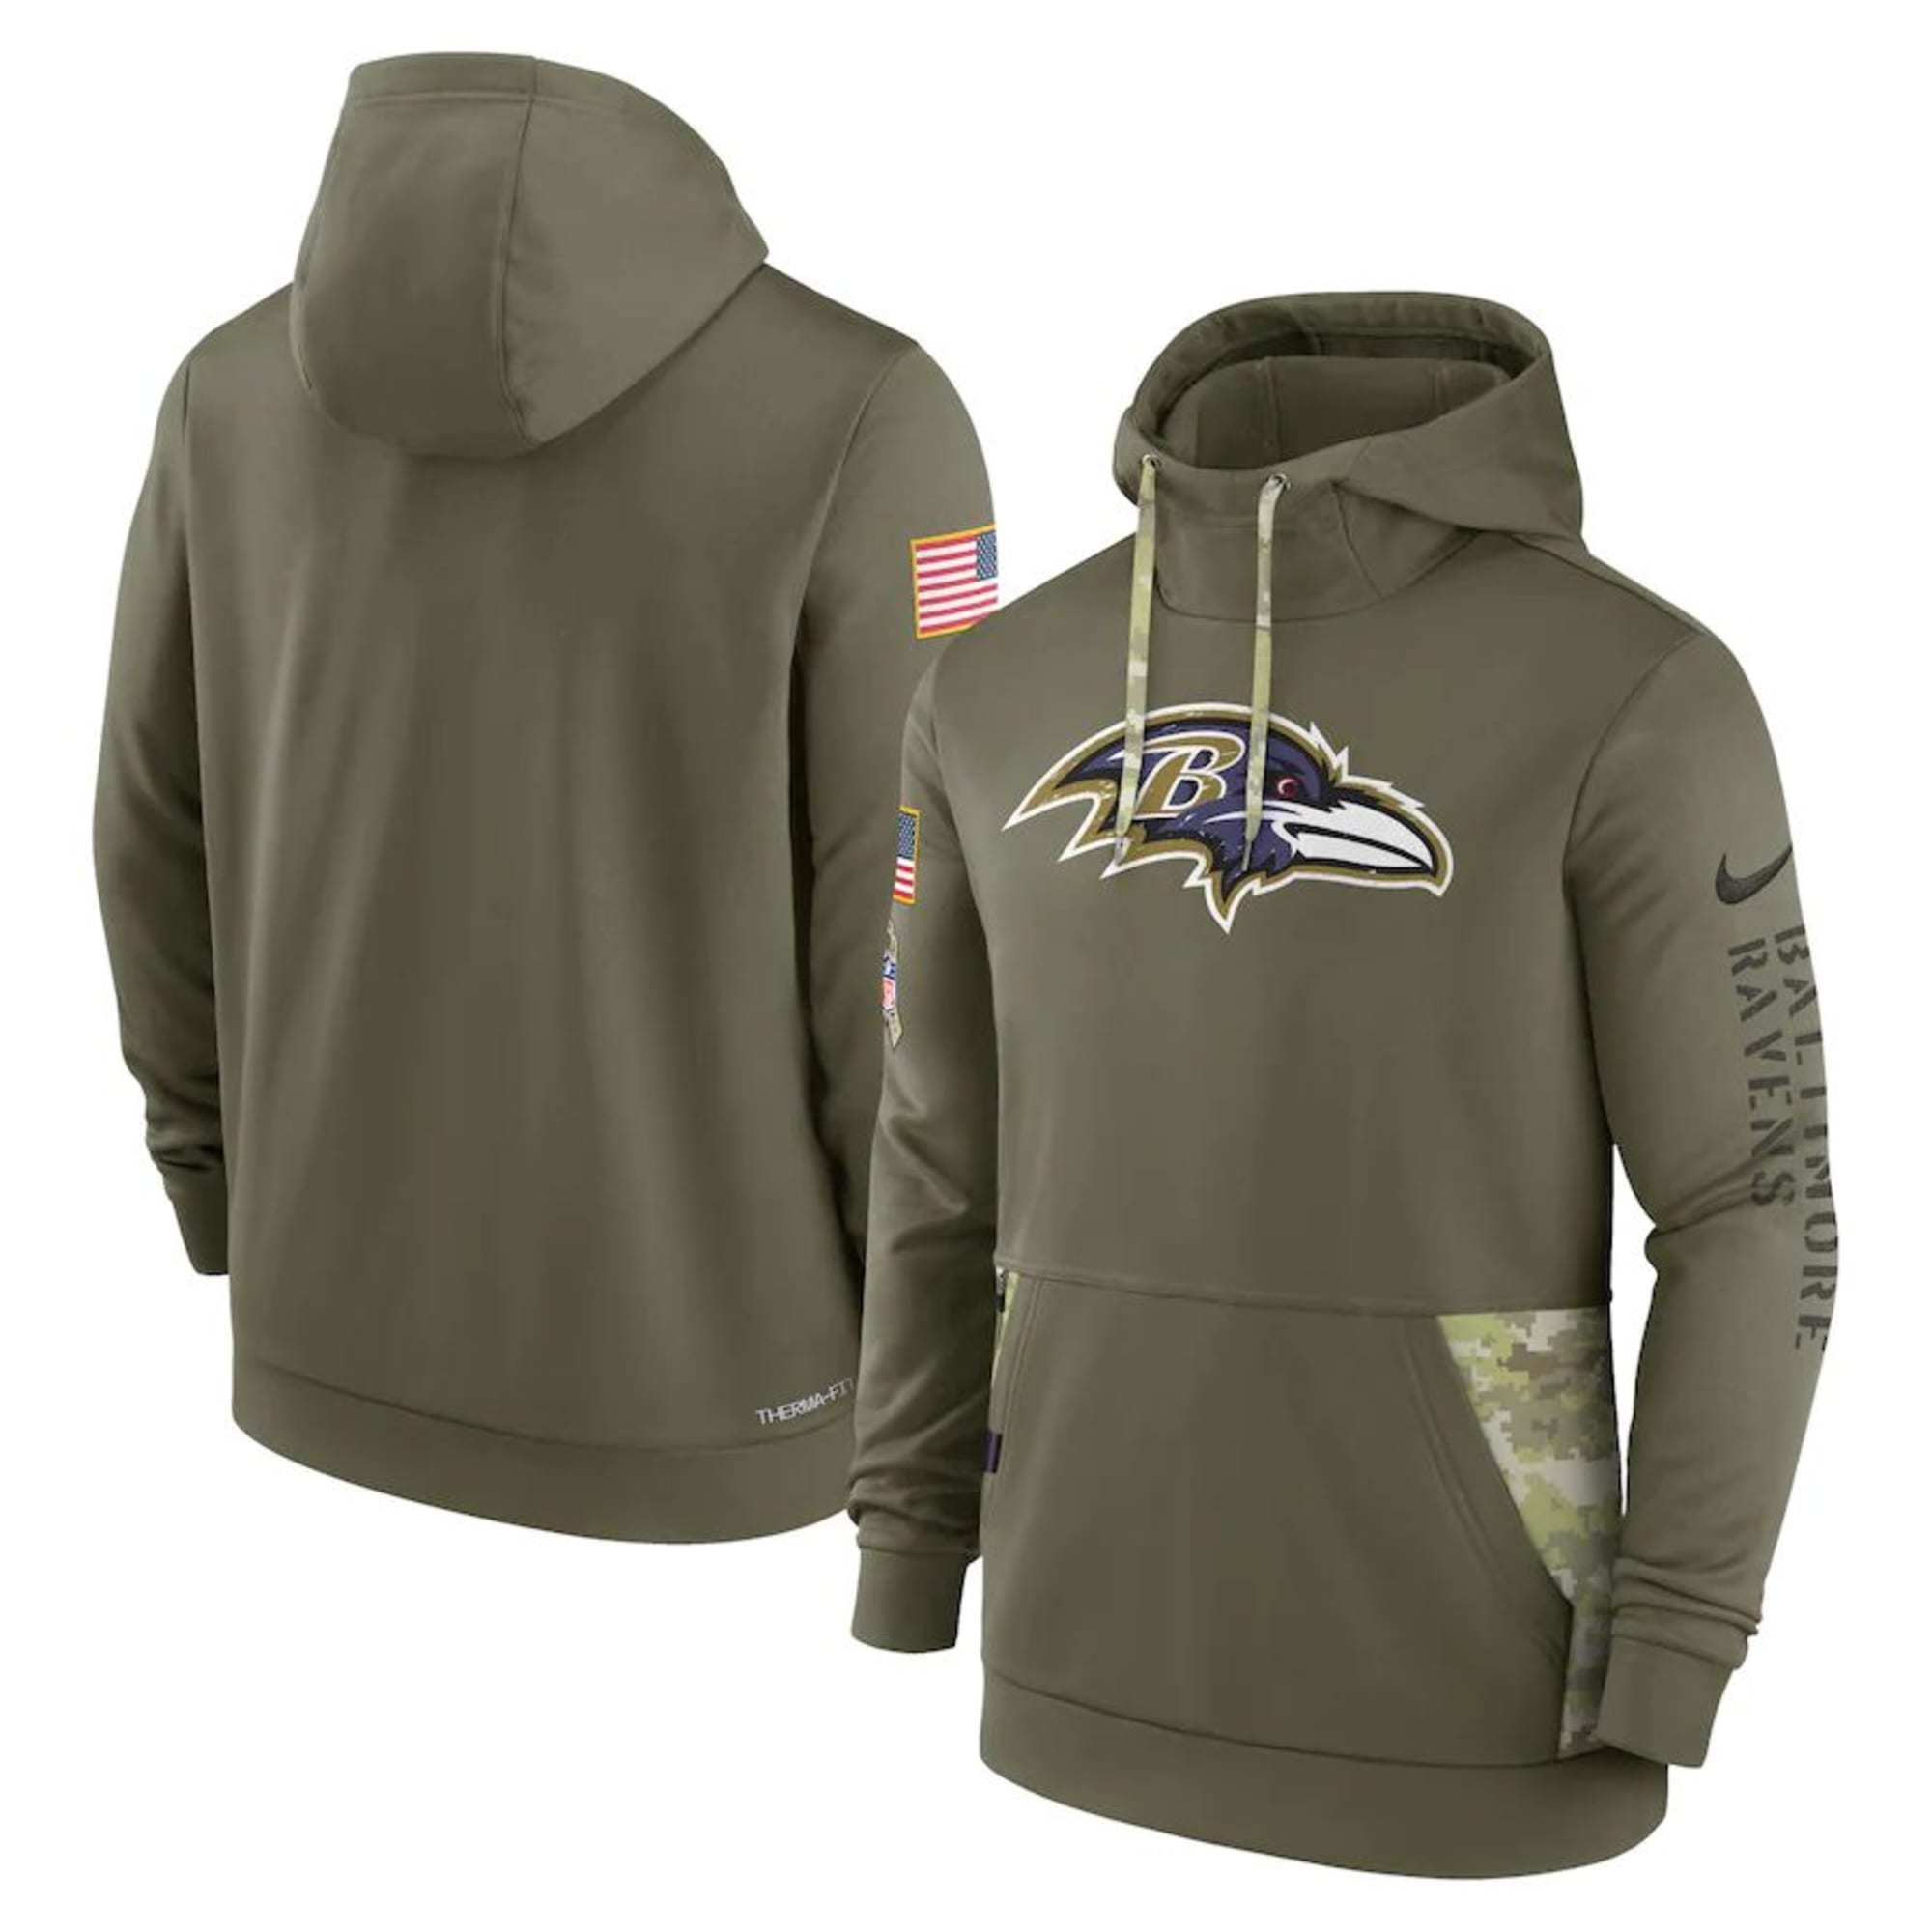 Winter Wonderland: Holiday Baltimore Ravens gifts for fans - BVM Sports